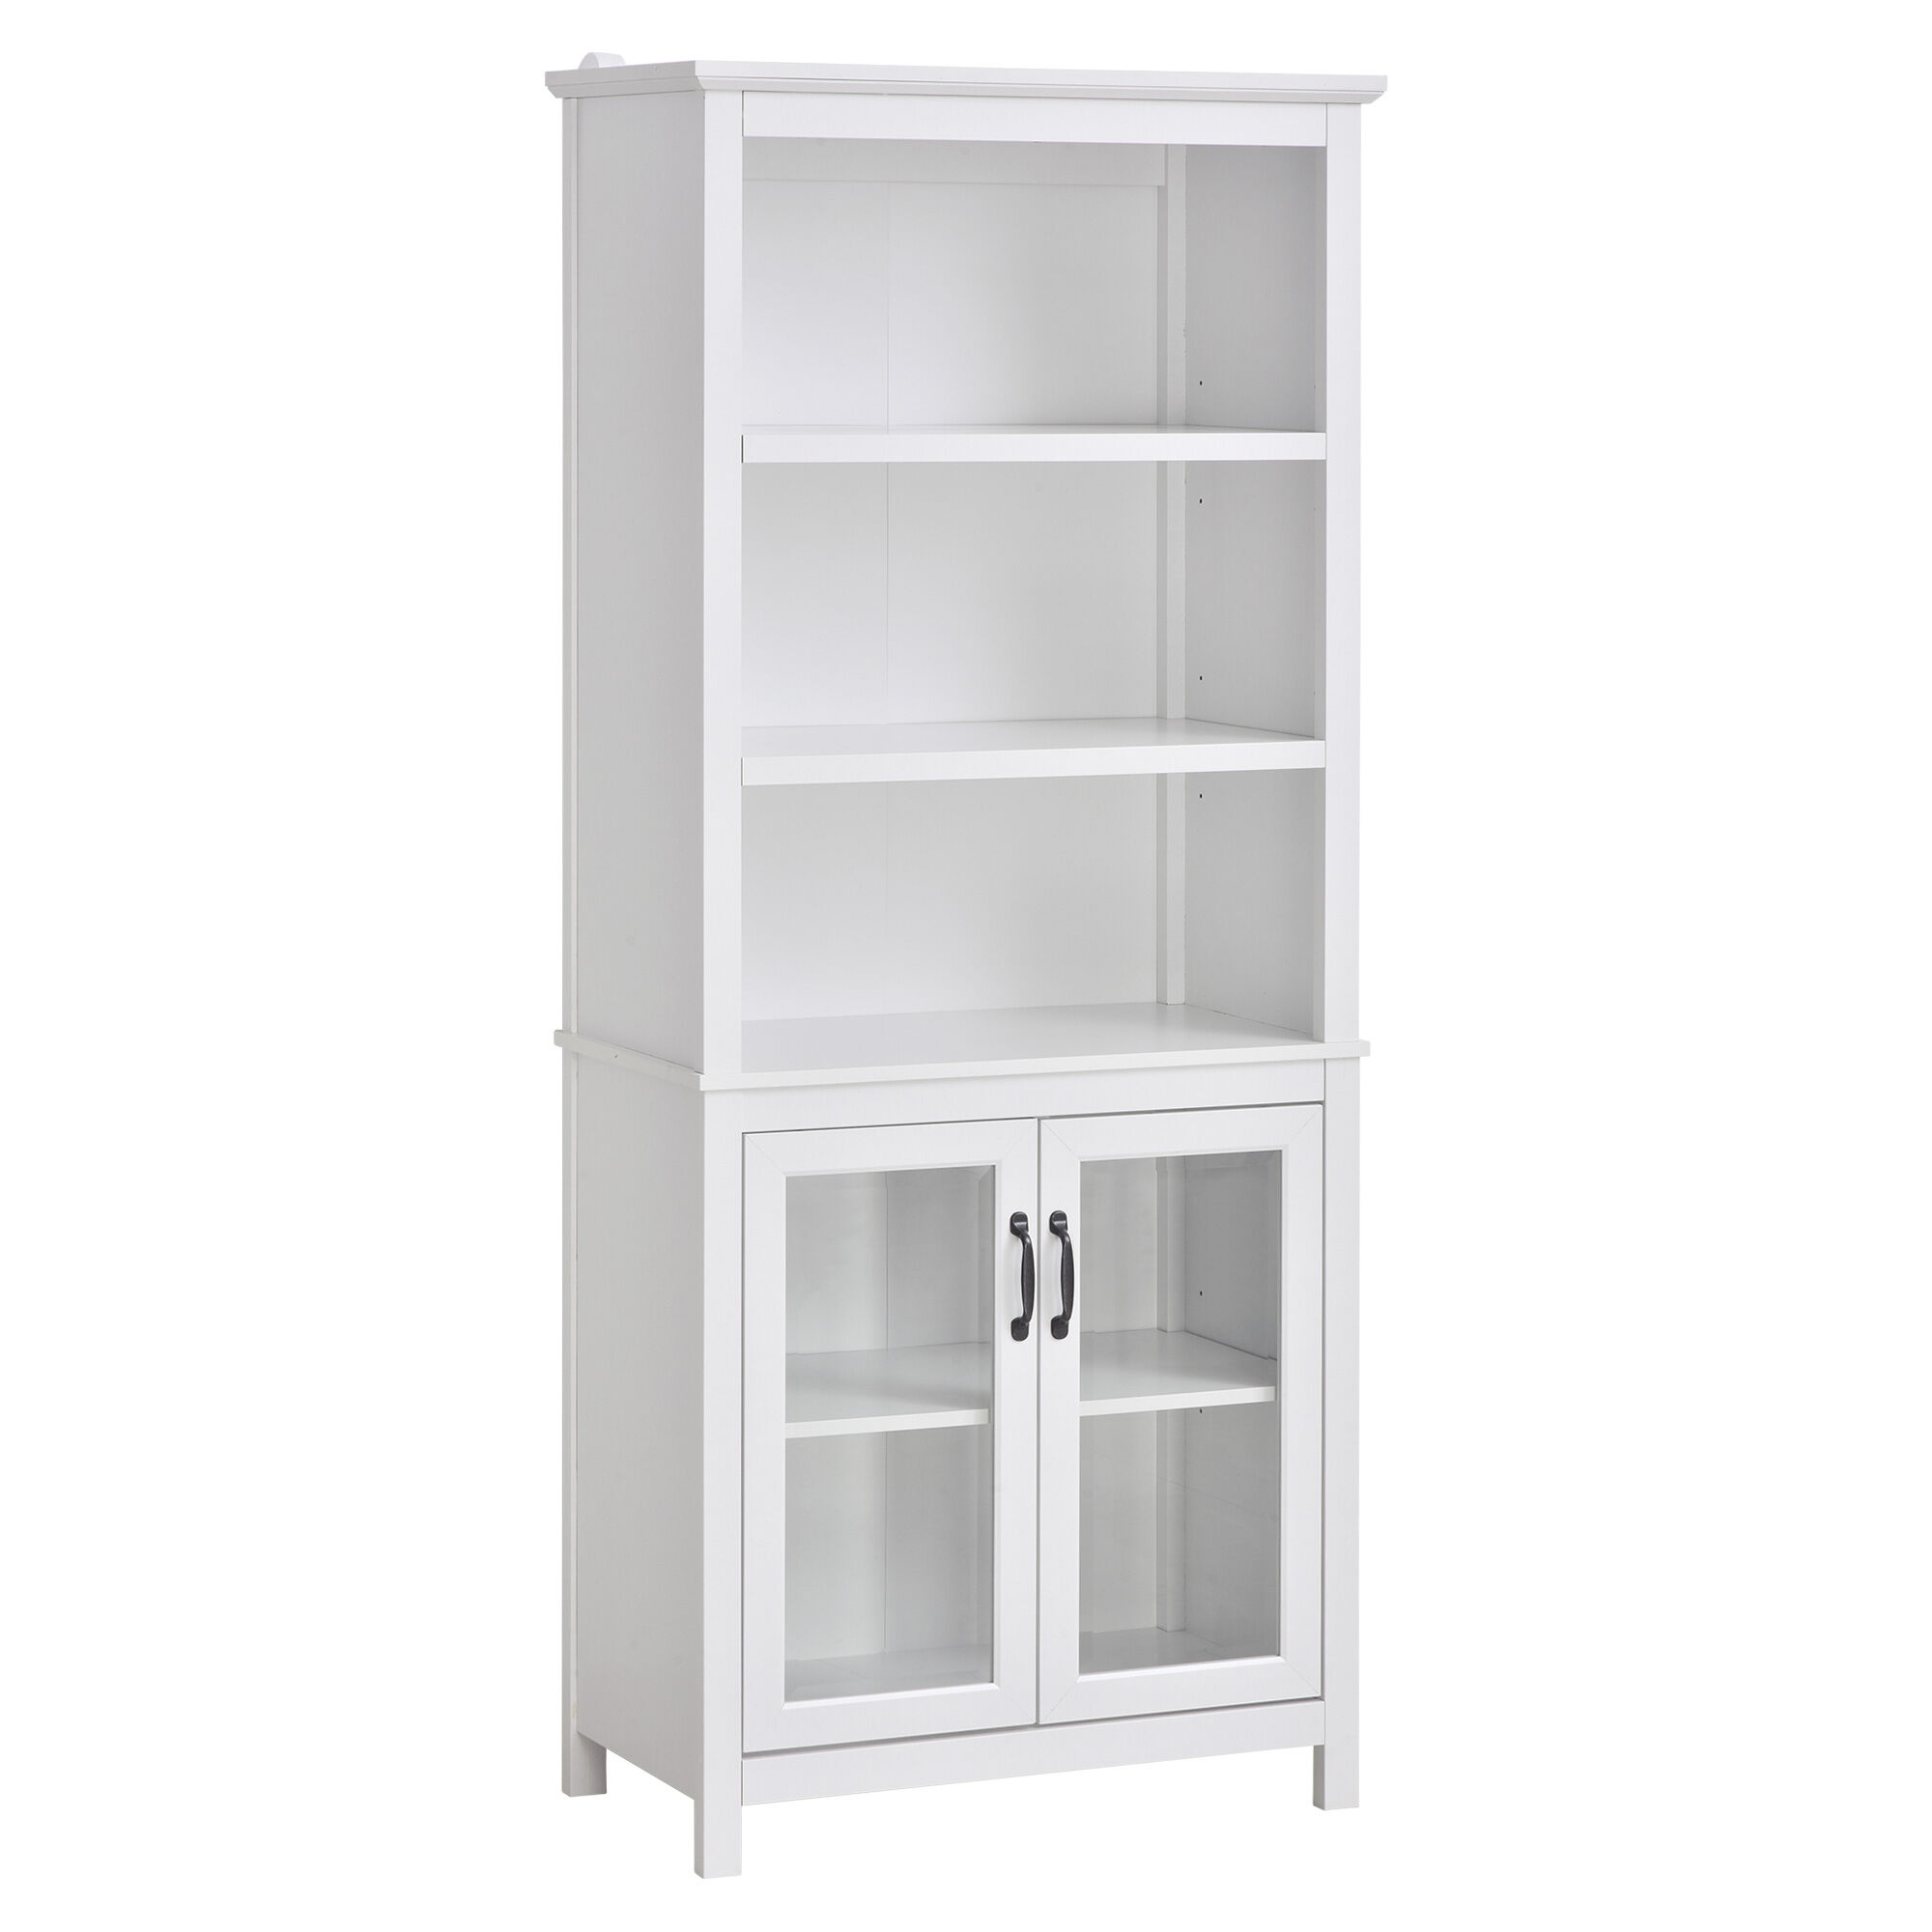 HOMCOM Bookcase, Elegant Bookshelf Cabinet with 3 Open Shelves and Double-Door Cabinet for Home Office, Living Room, Display Cabinet, White